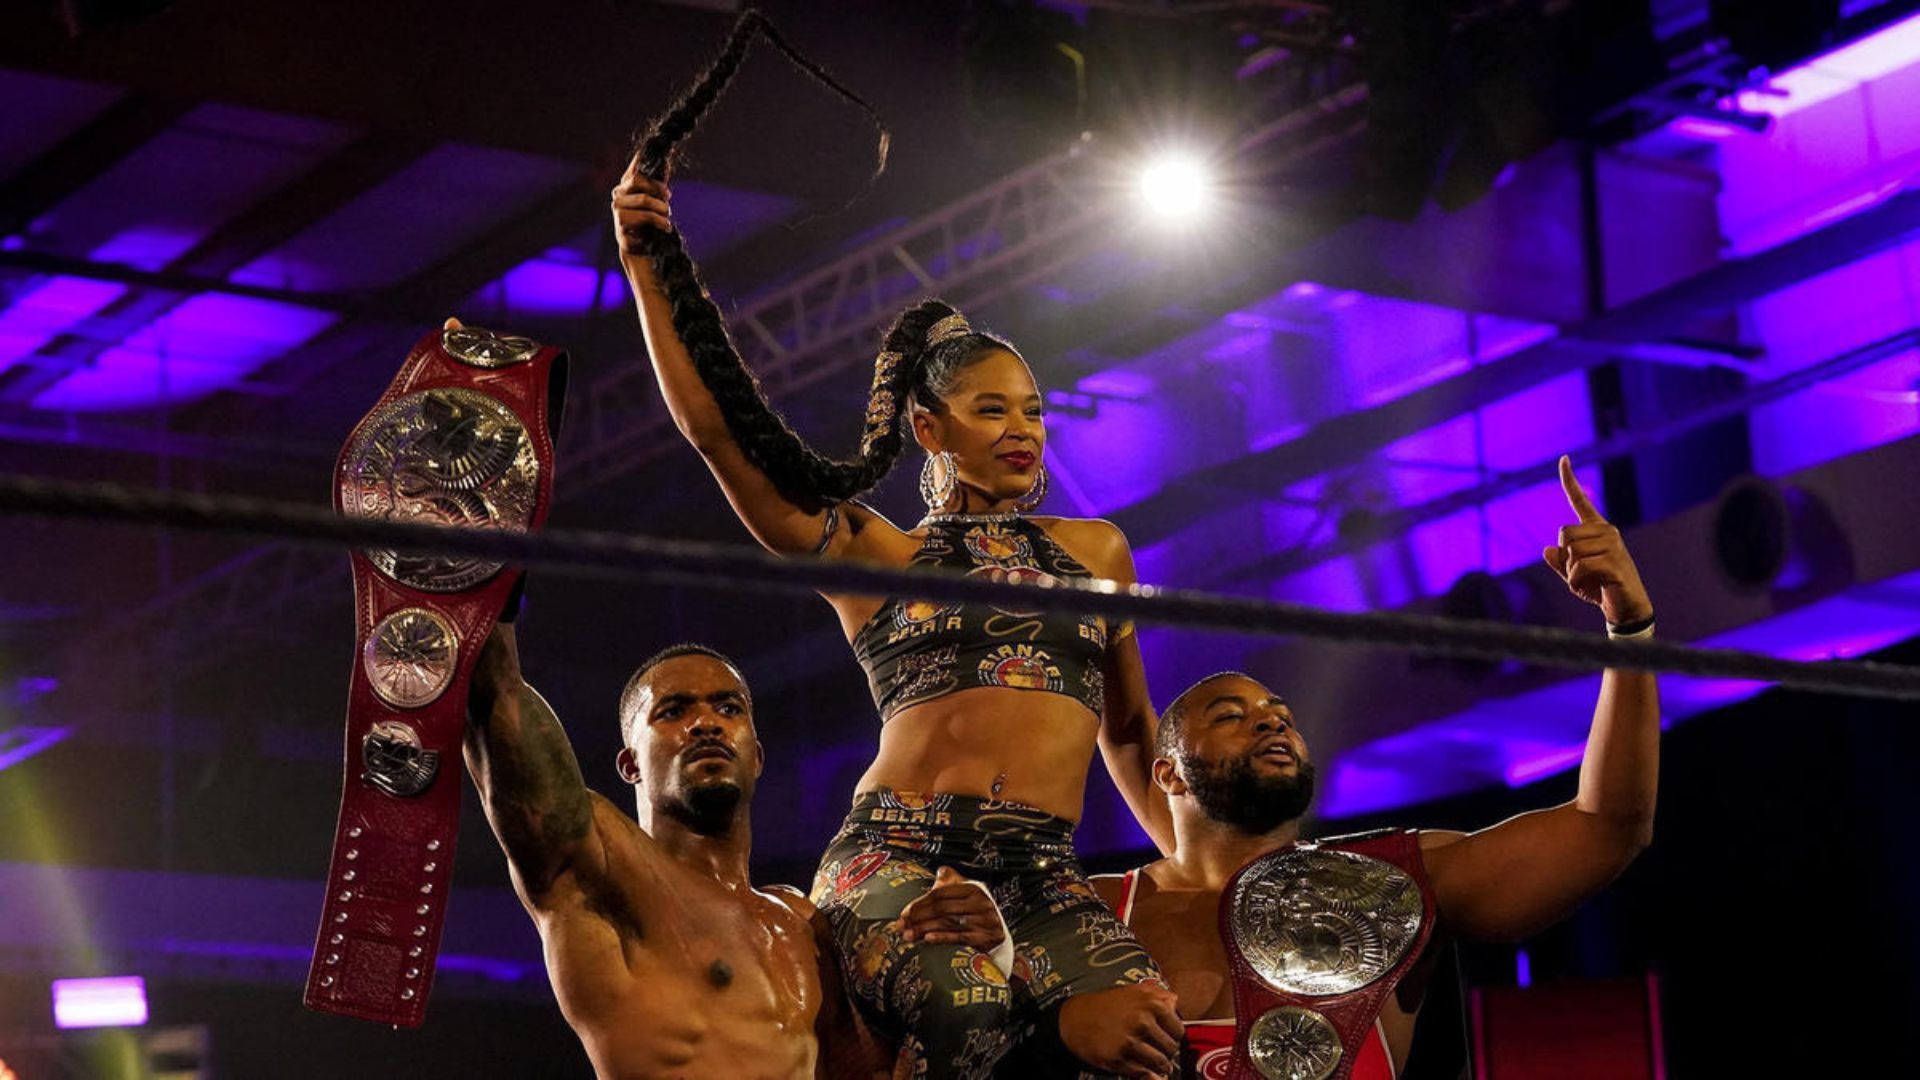 Bianca Belair made her main roster debut at WrestleMania 36 by helping the Street Profits.